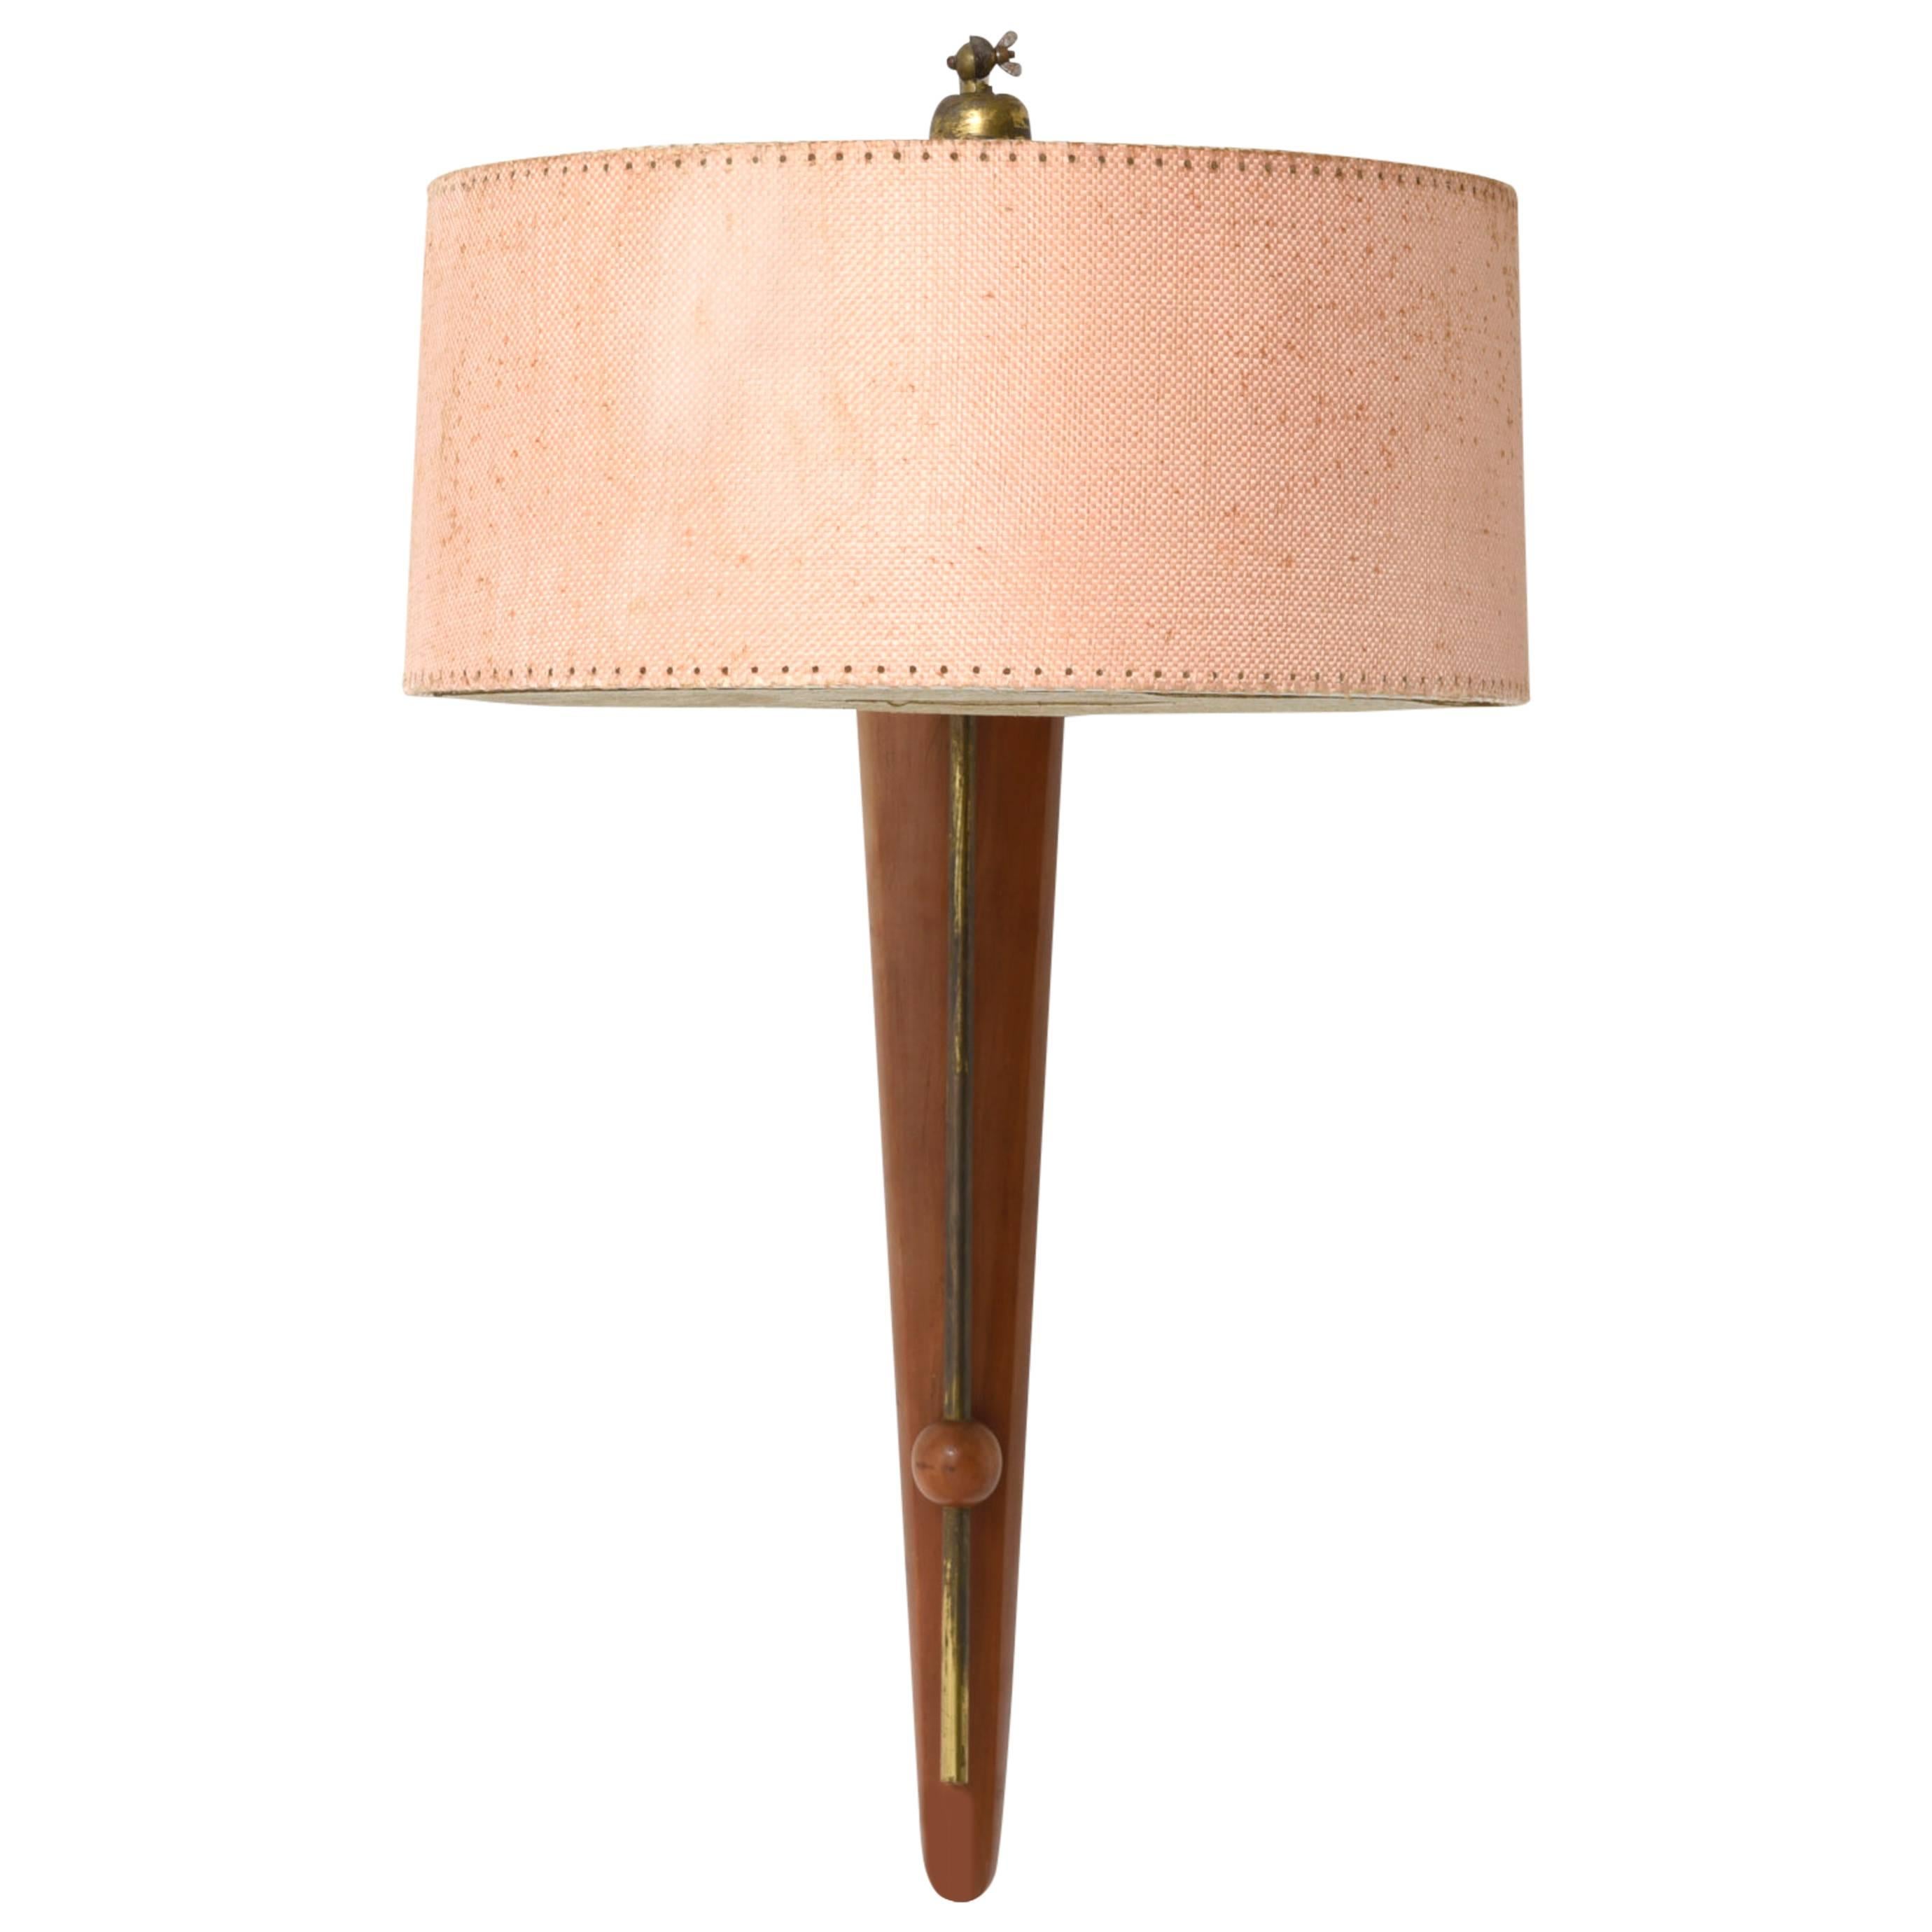 Elegant teakwood wall lamp with brass elements and fabric shade.